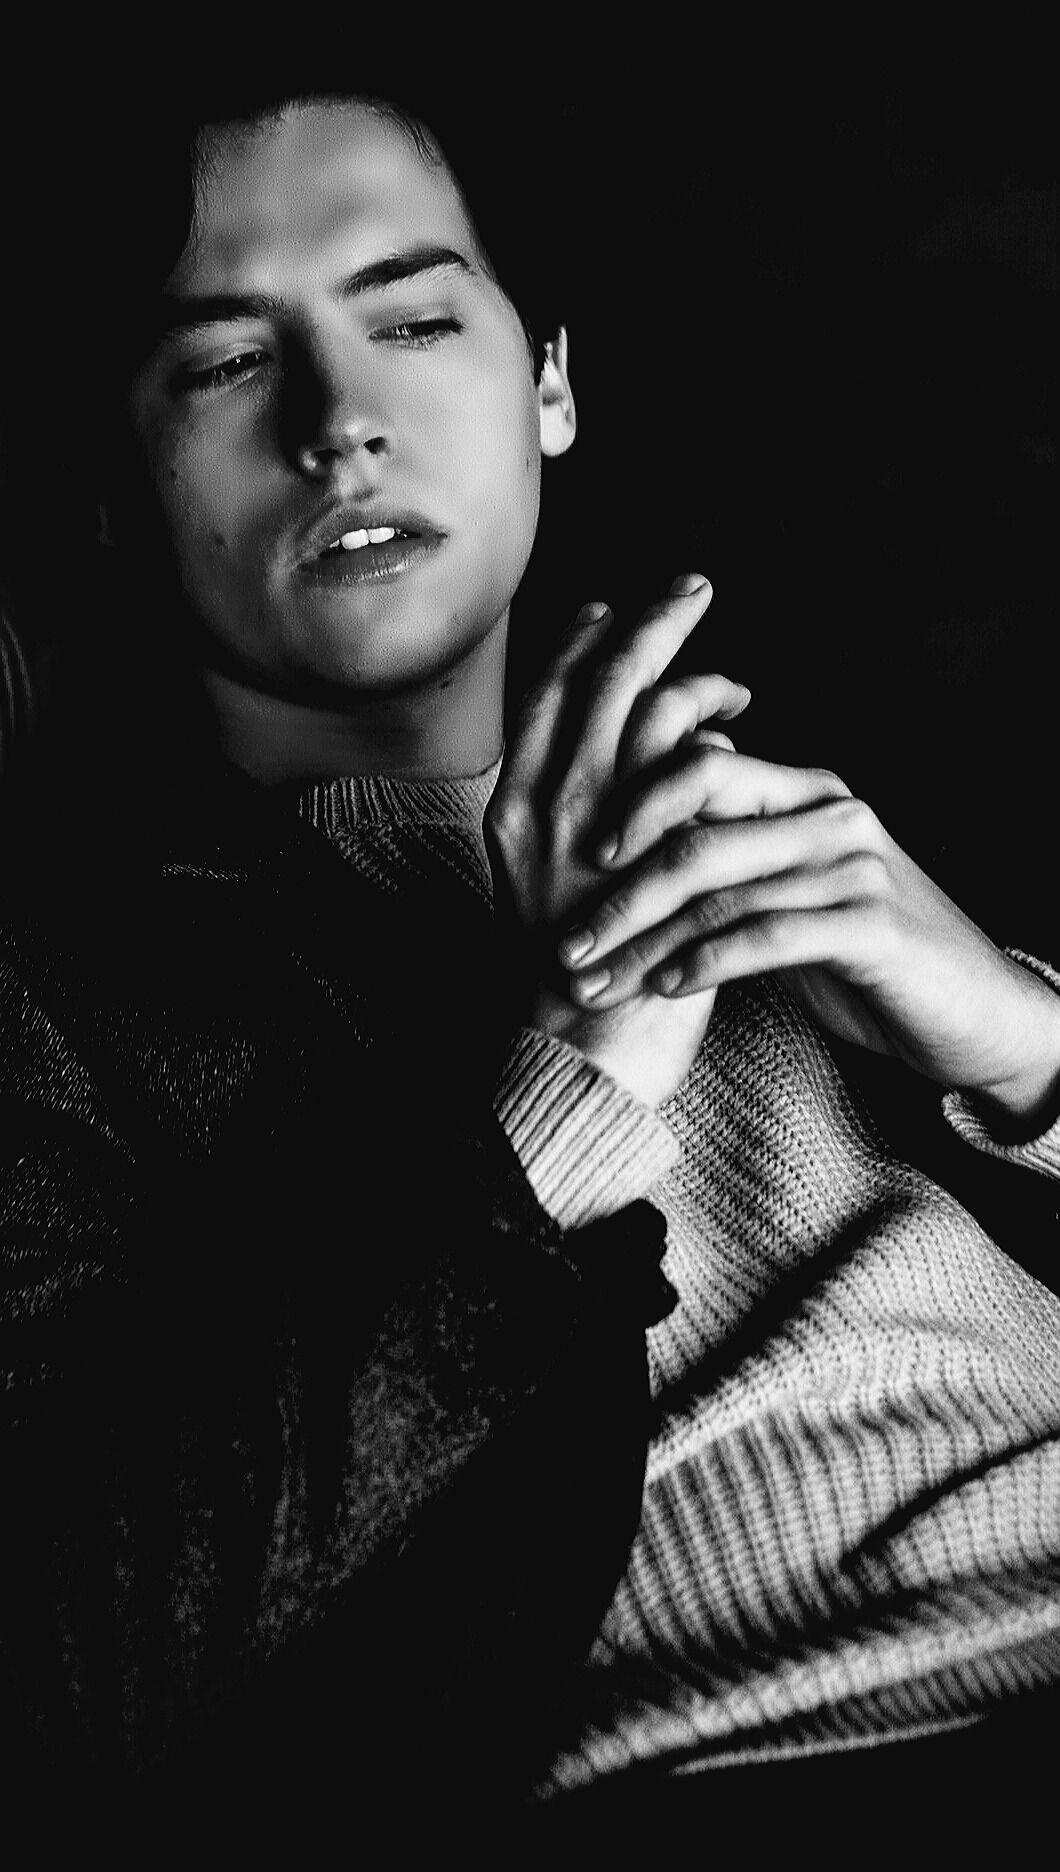 cole sprouse wallpaper hashtag Image on Tumblr